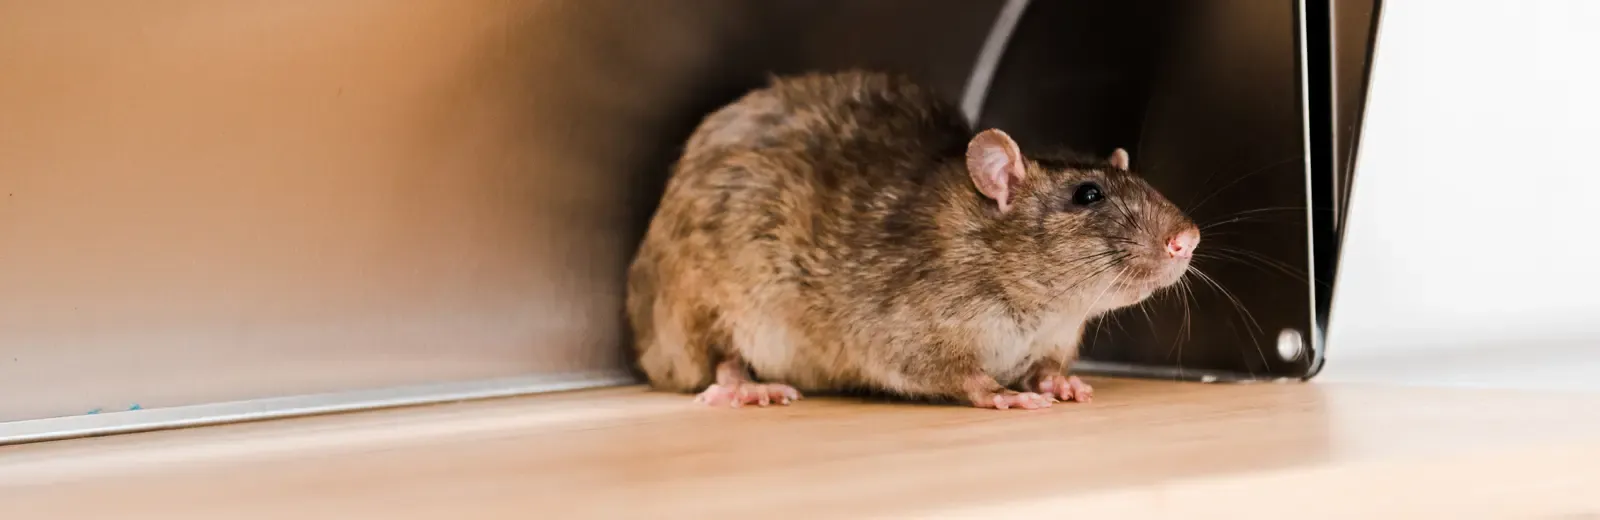 mouse hiding in kitchen